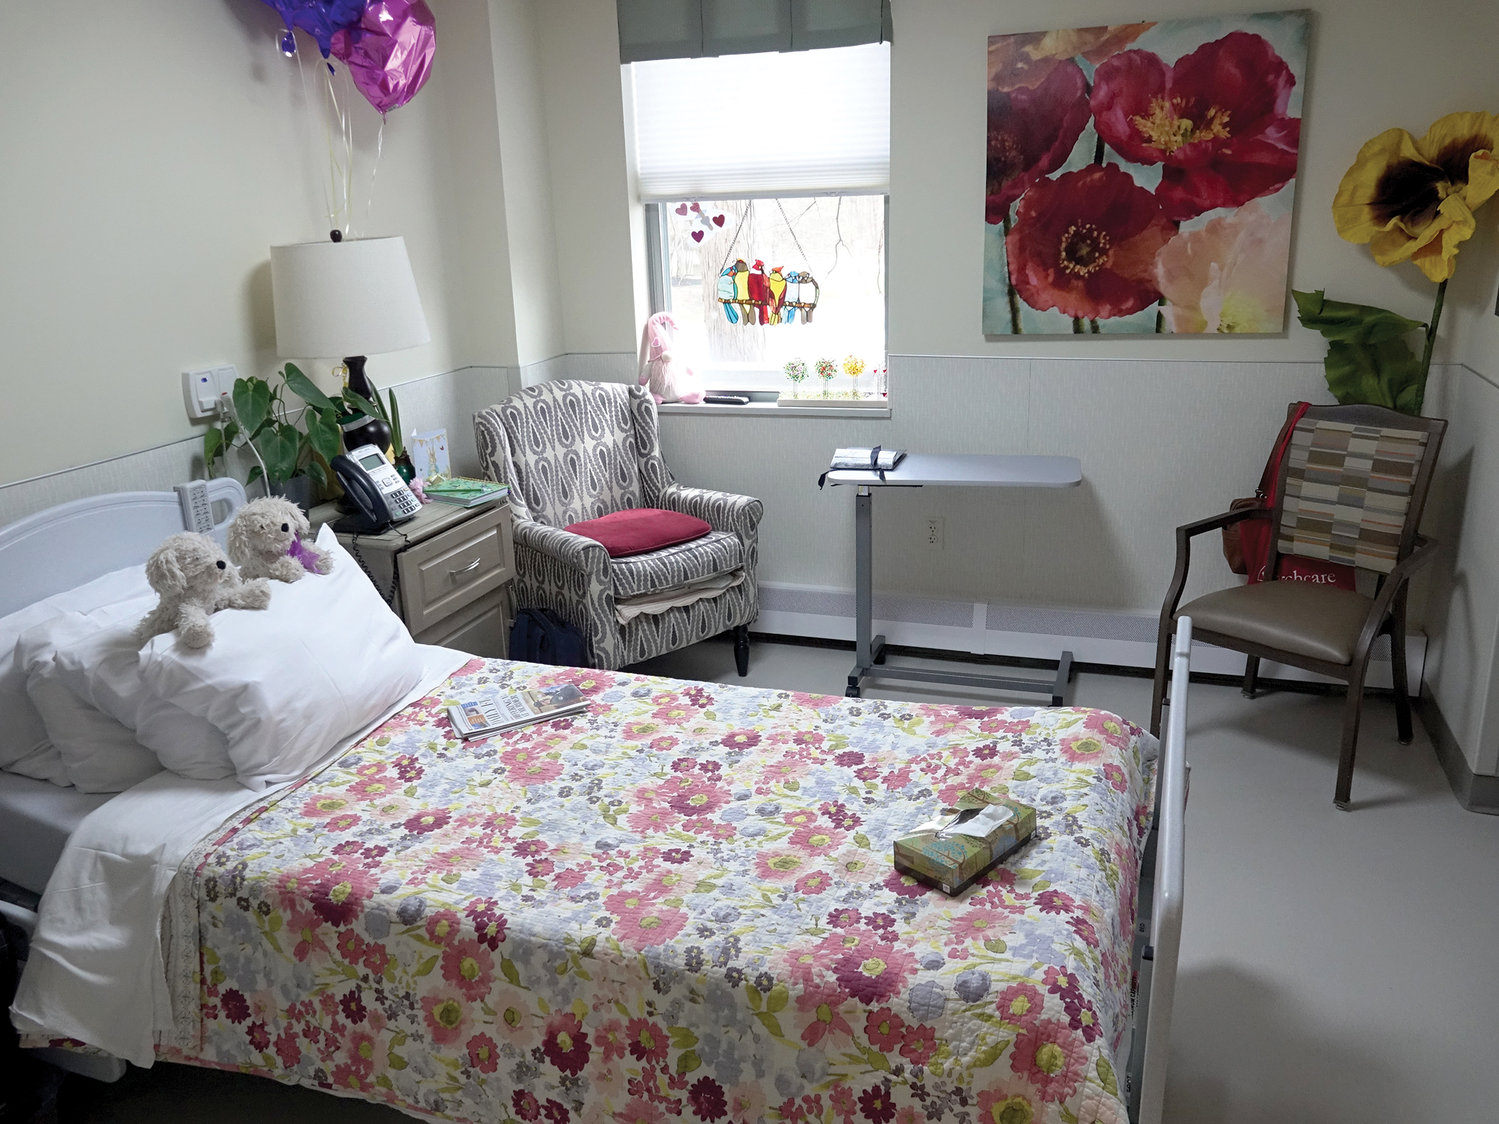 One of the brightly colored rooms in the Center for Advanced Memory Care.